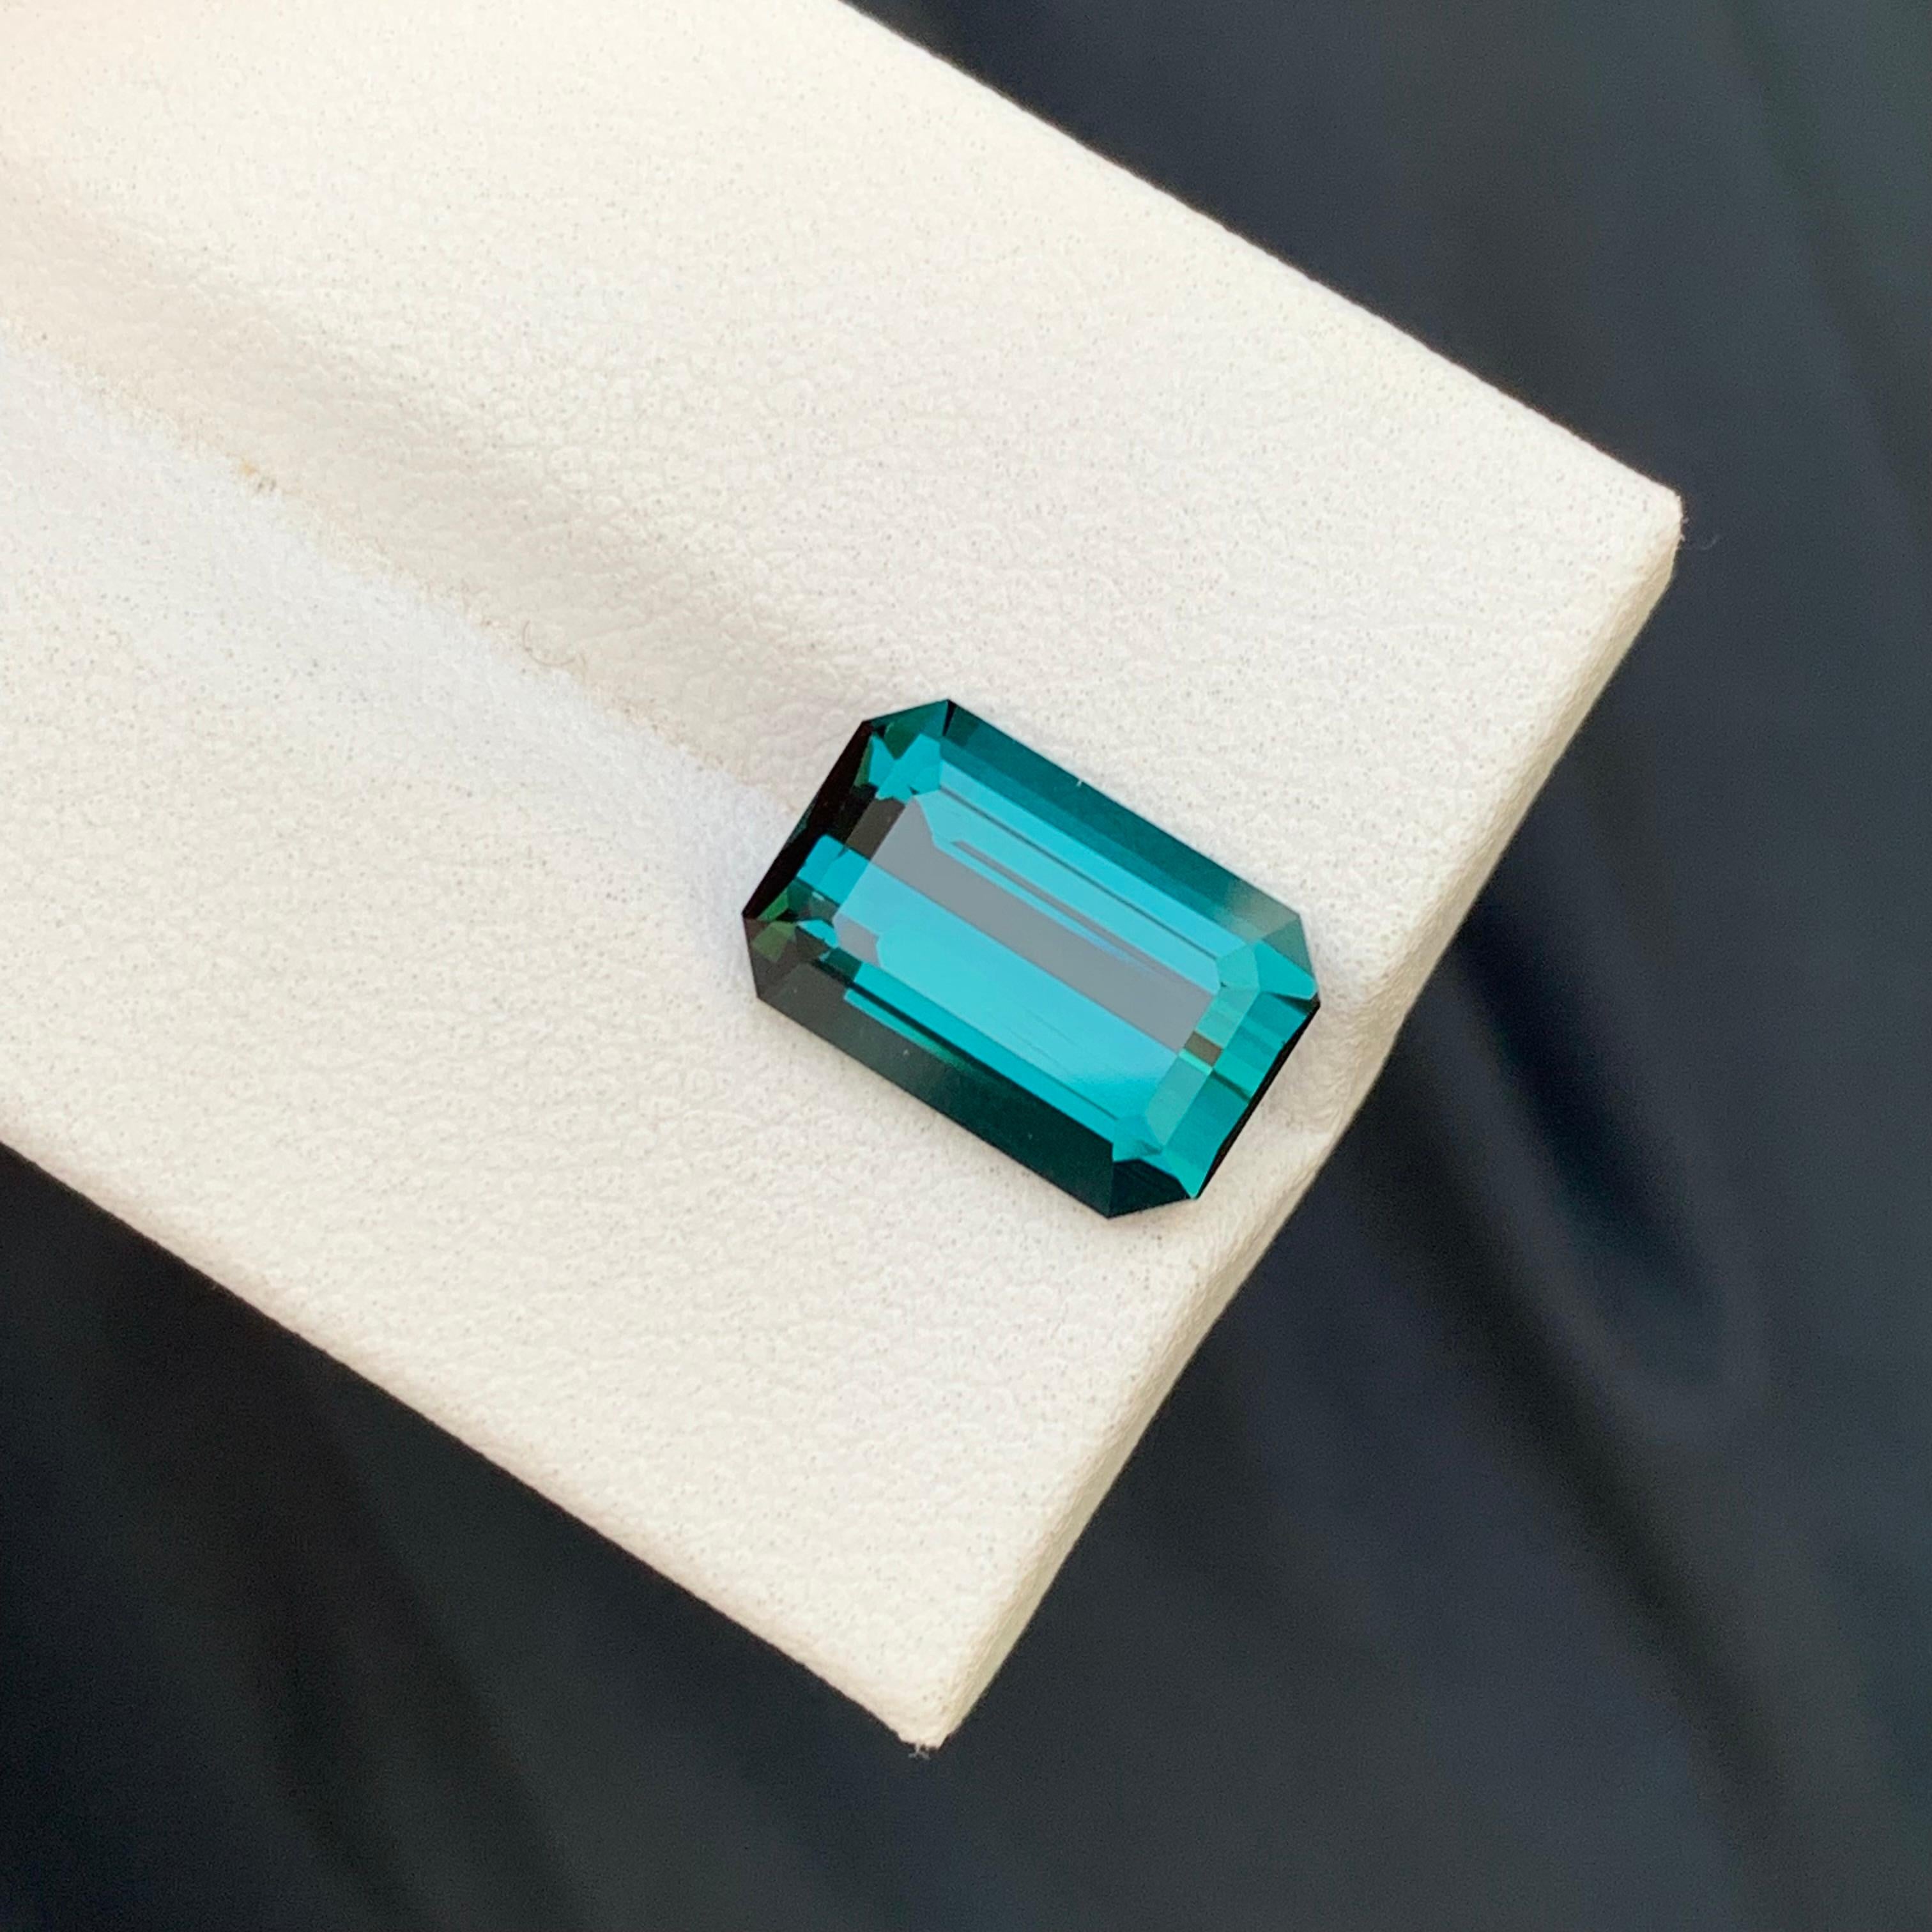 Top AAA Quality Natural Loose Indicolite Tourmaline 4.45 Carats Ring Gem For Sale 4